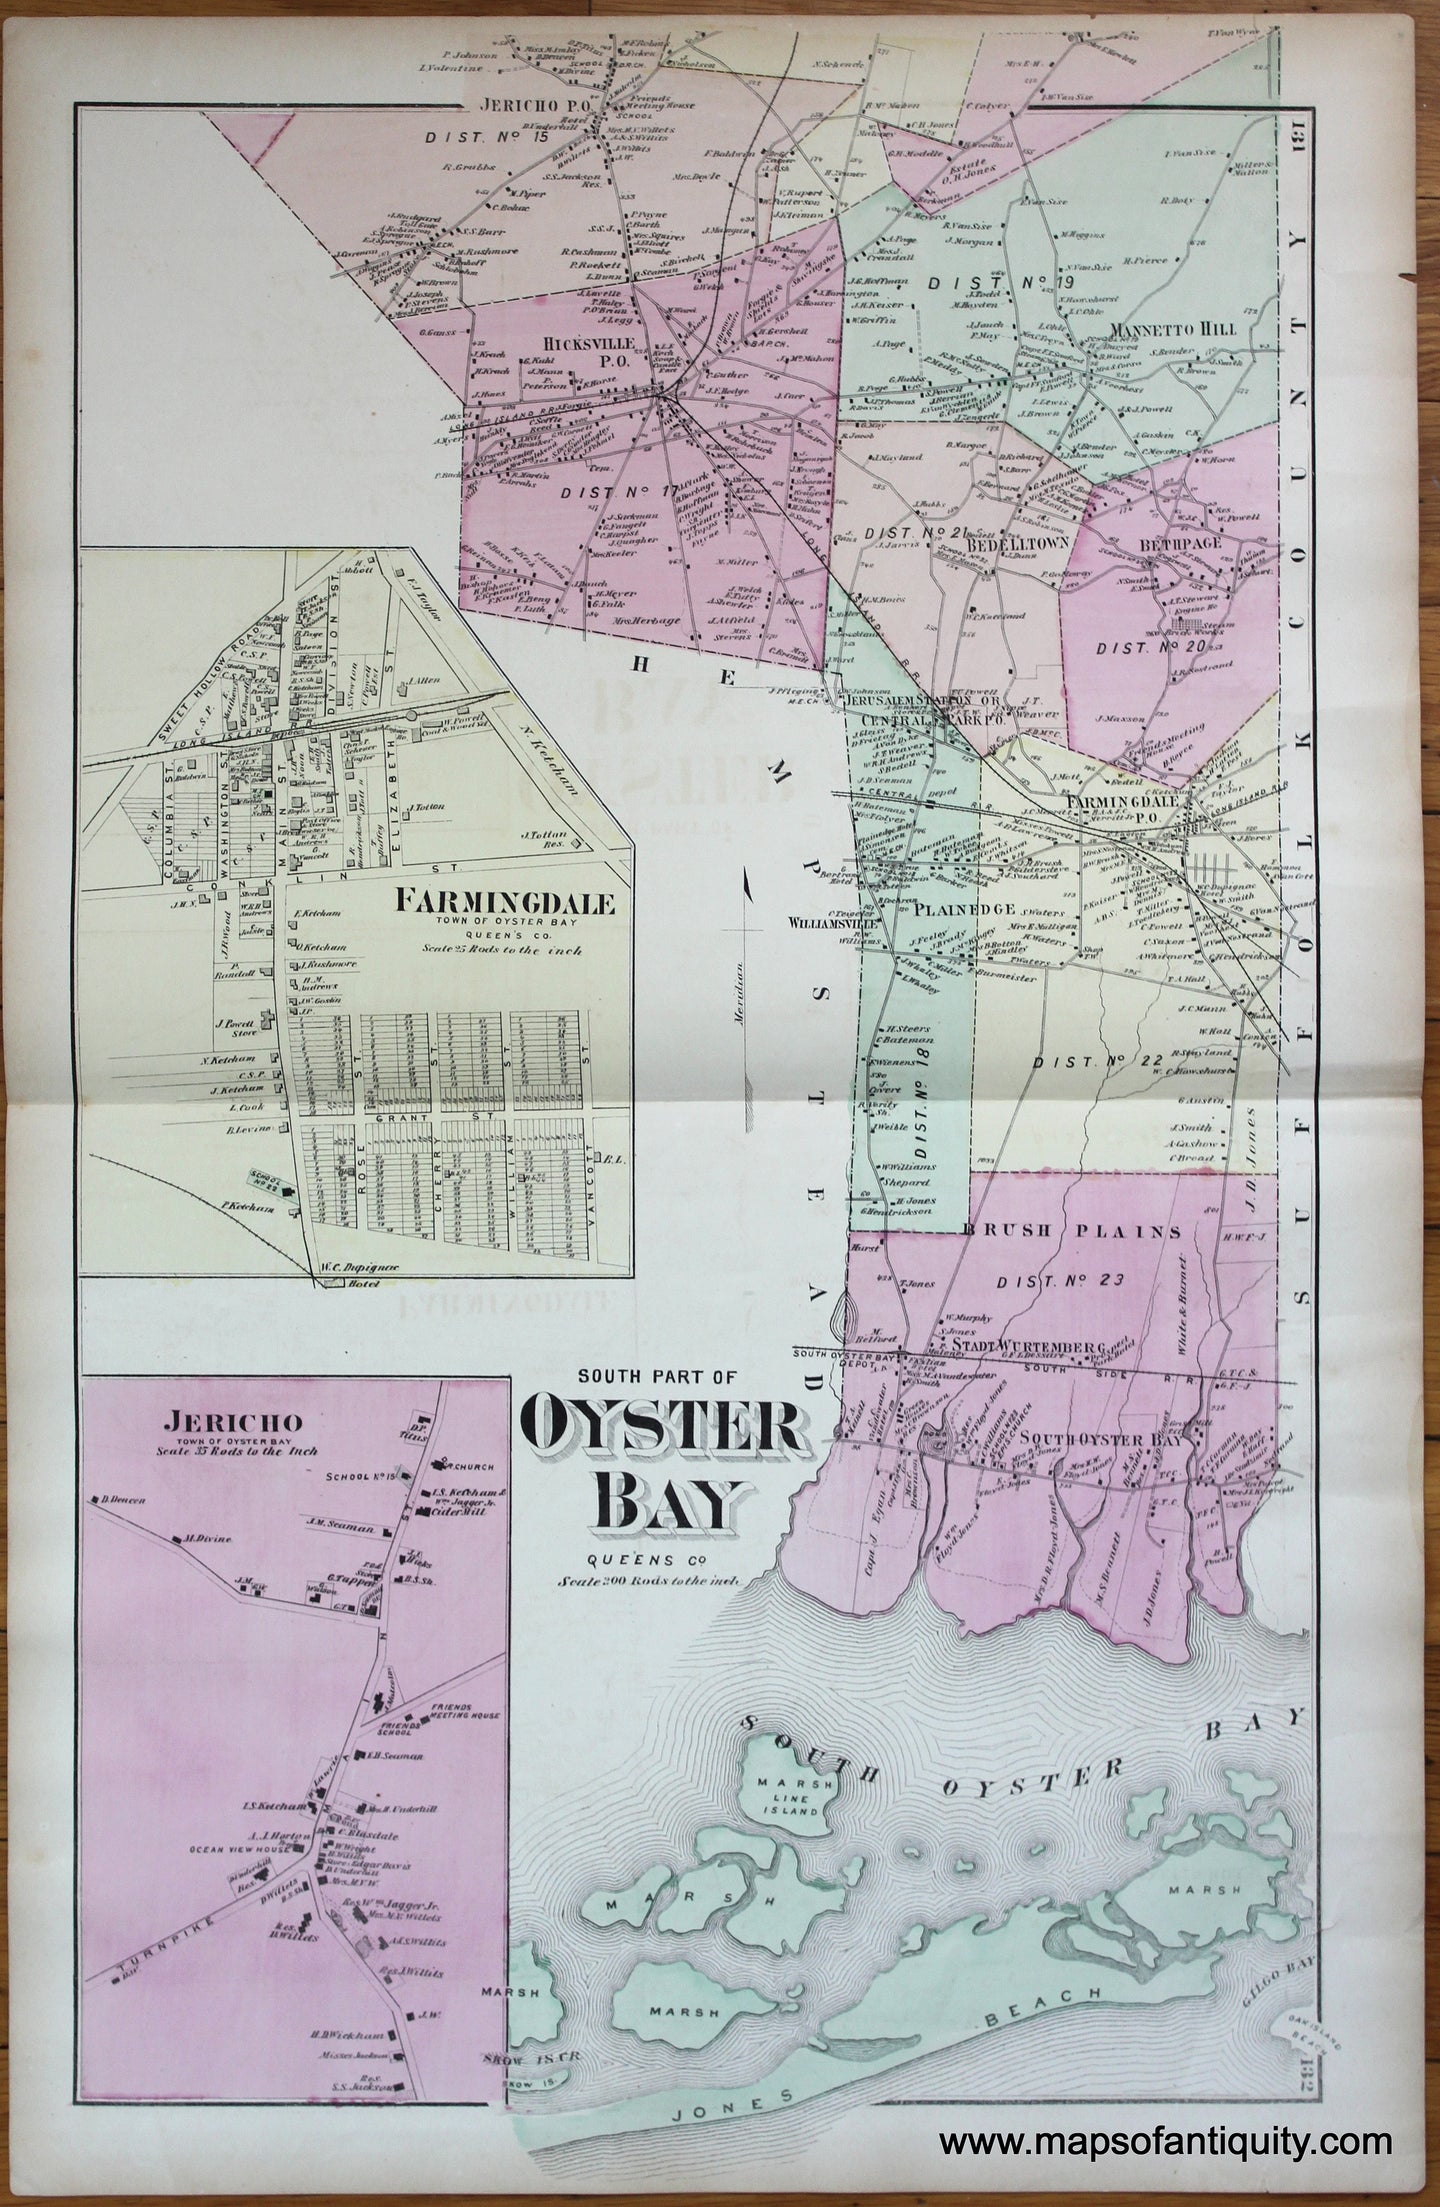 Antique-Hand-Colored-Map-South-Part-of-Oyster-Bay-Long-Island-New-York-Farmingdale-Jericho-verso-Lattingtown-Locust-Valley-Matinecock-and-Bayville-(NY)--United-States-Northeast-1873-Beers-Maps-Of-Antiquity